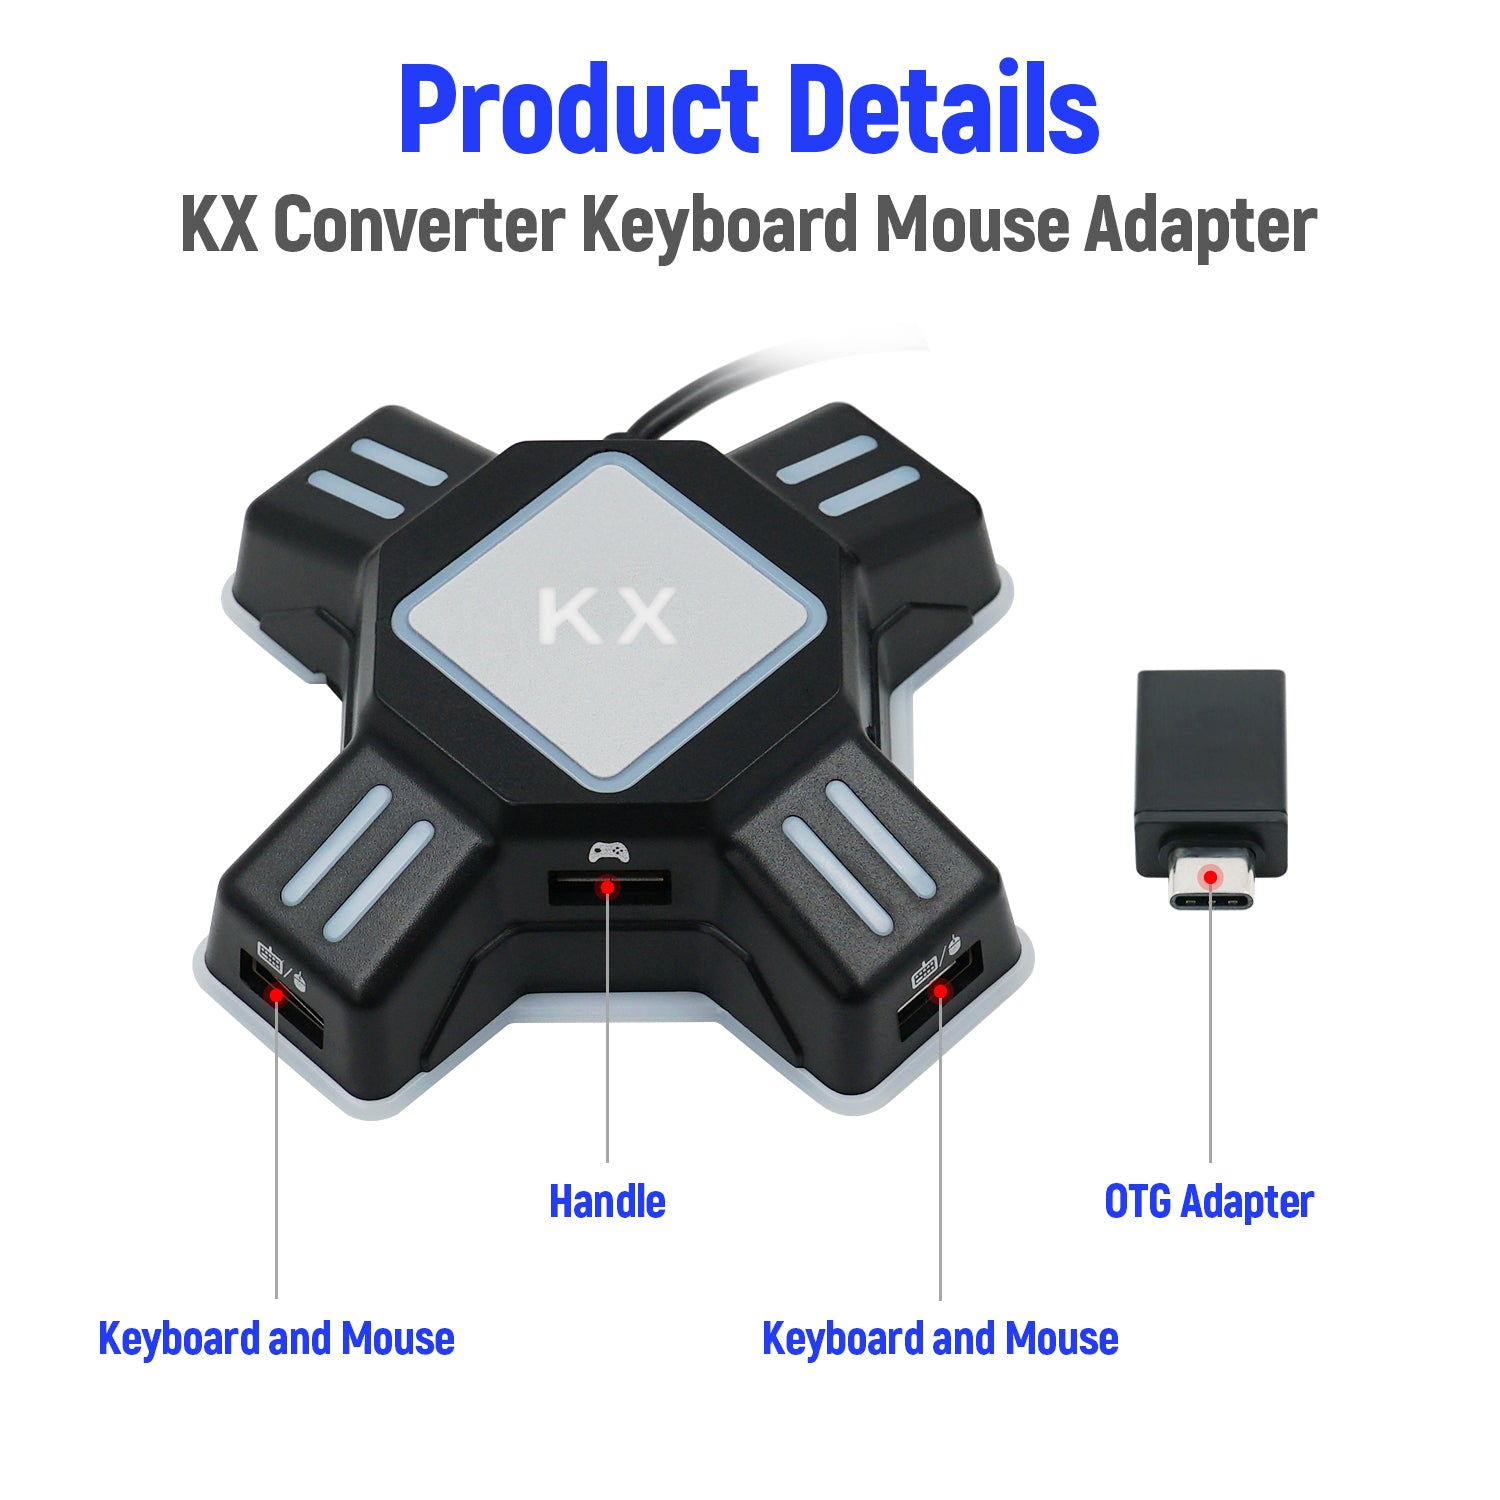 controller switches to keyboard and mouse automatically